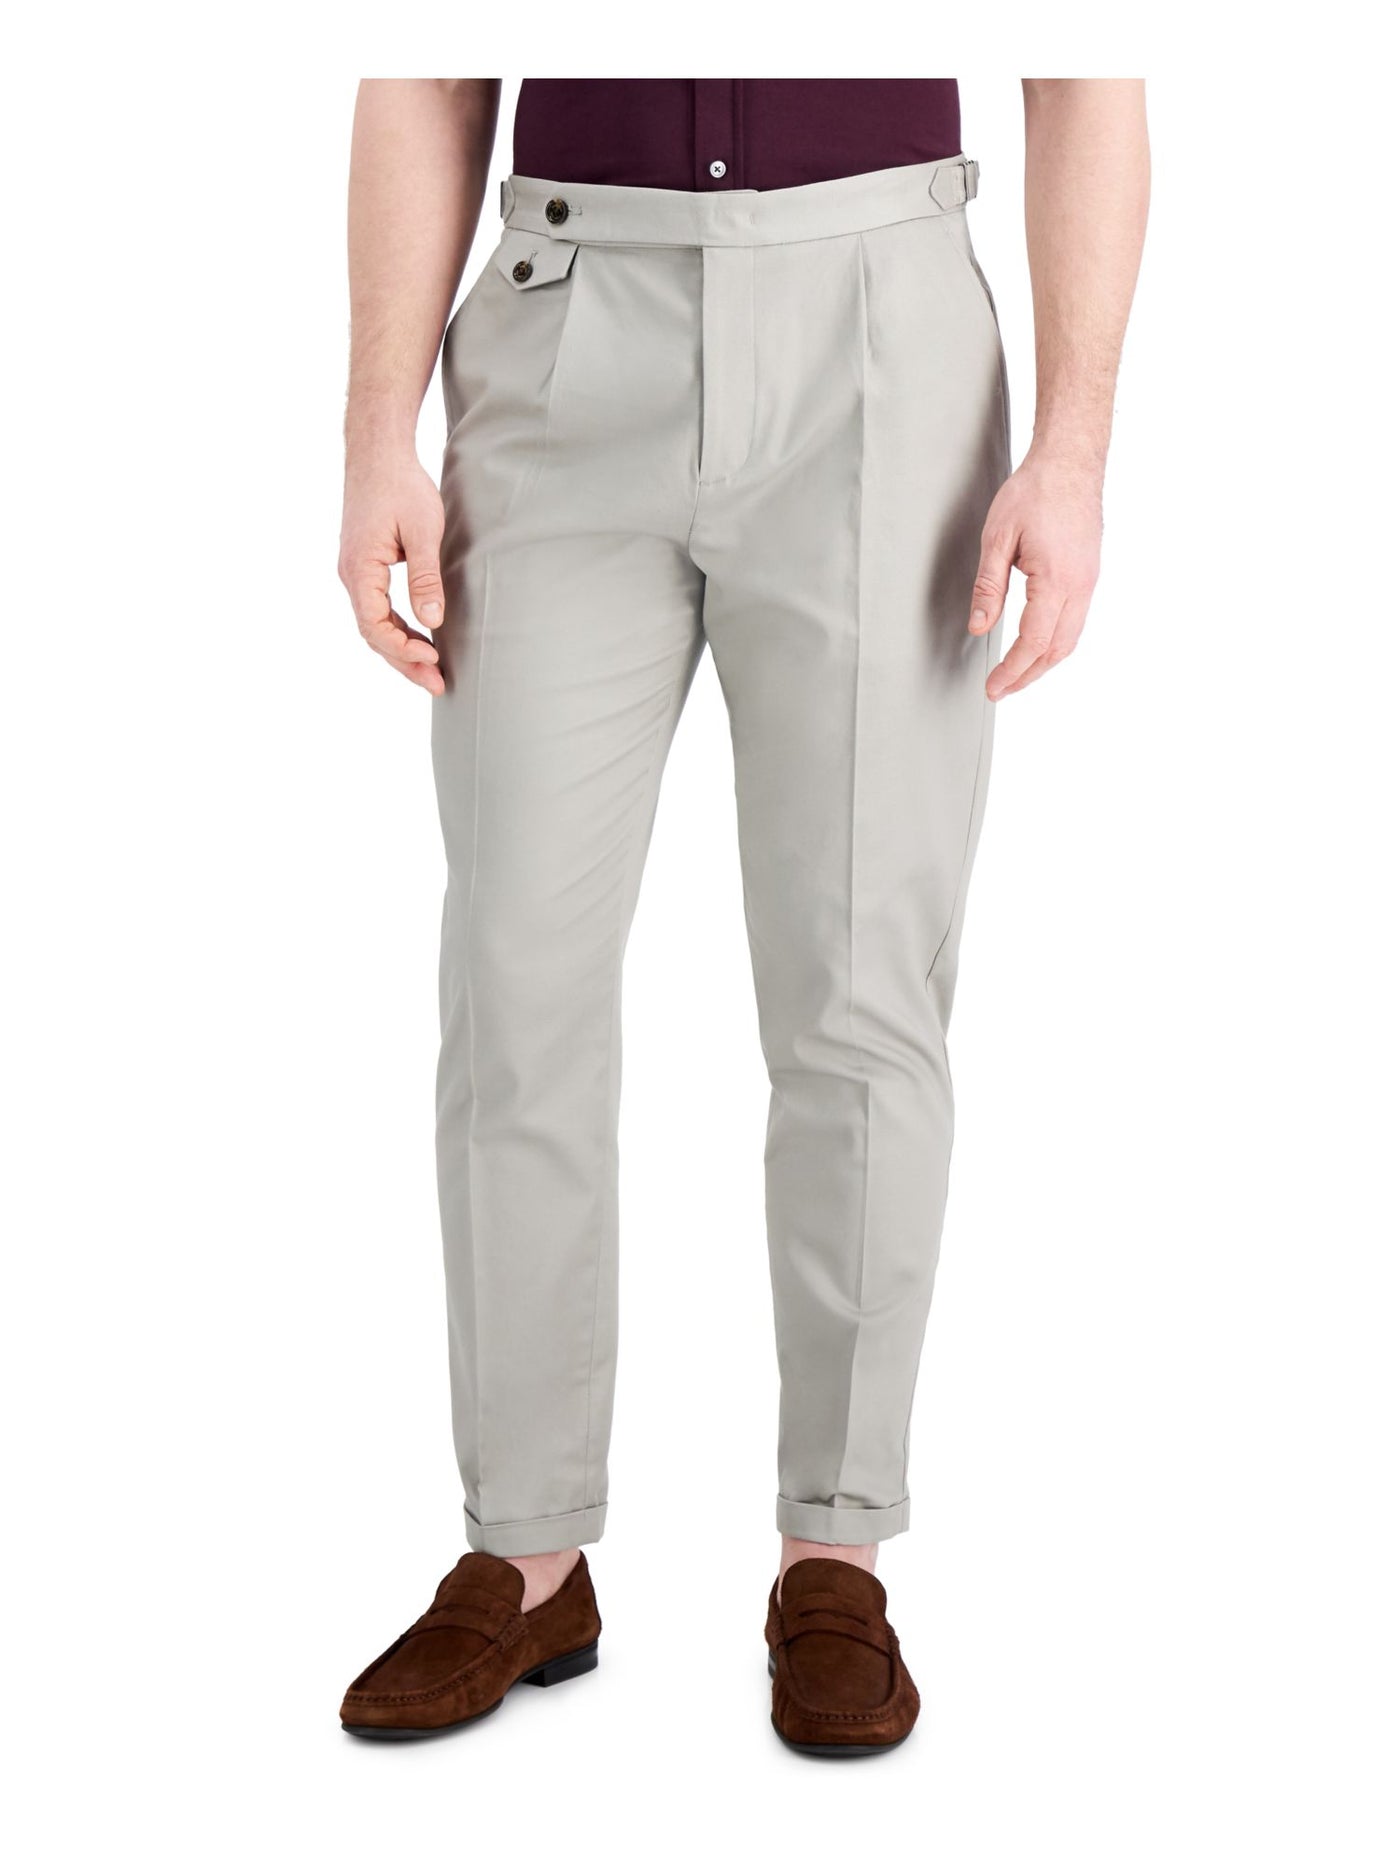 TASSO ELBA Mens Gray Easy Care, Classic Fit Stretch Pants 36W\32L